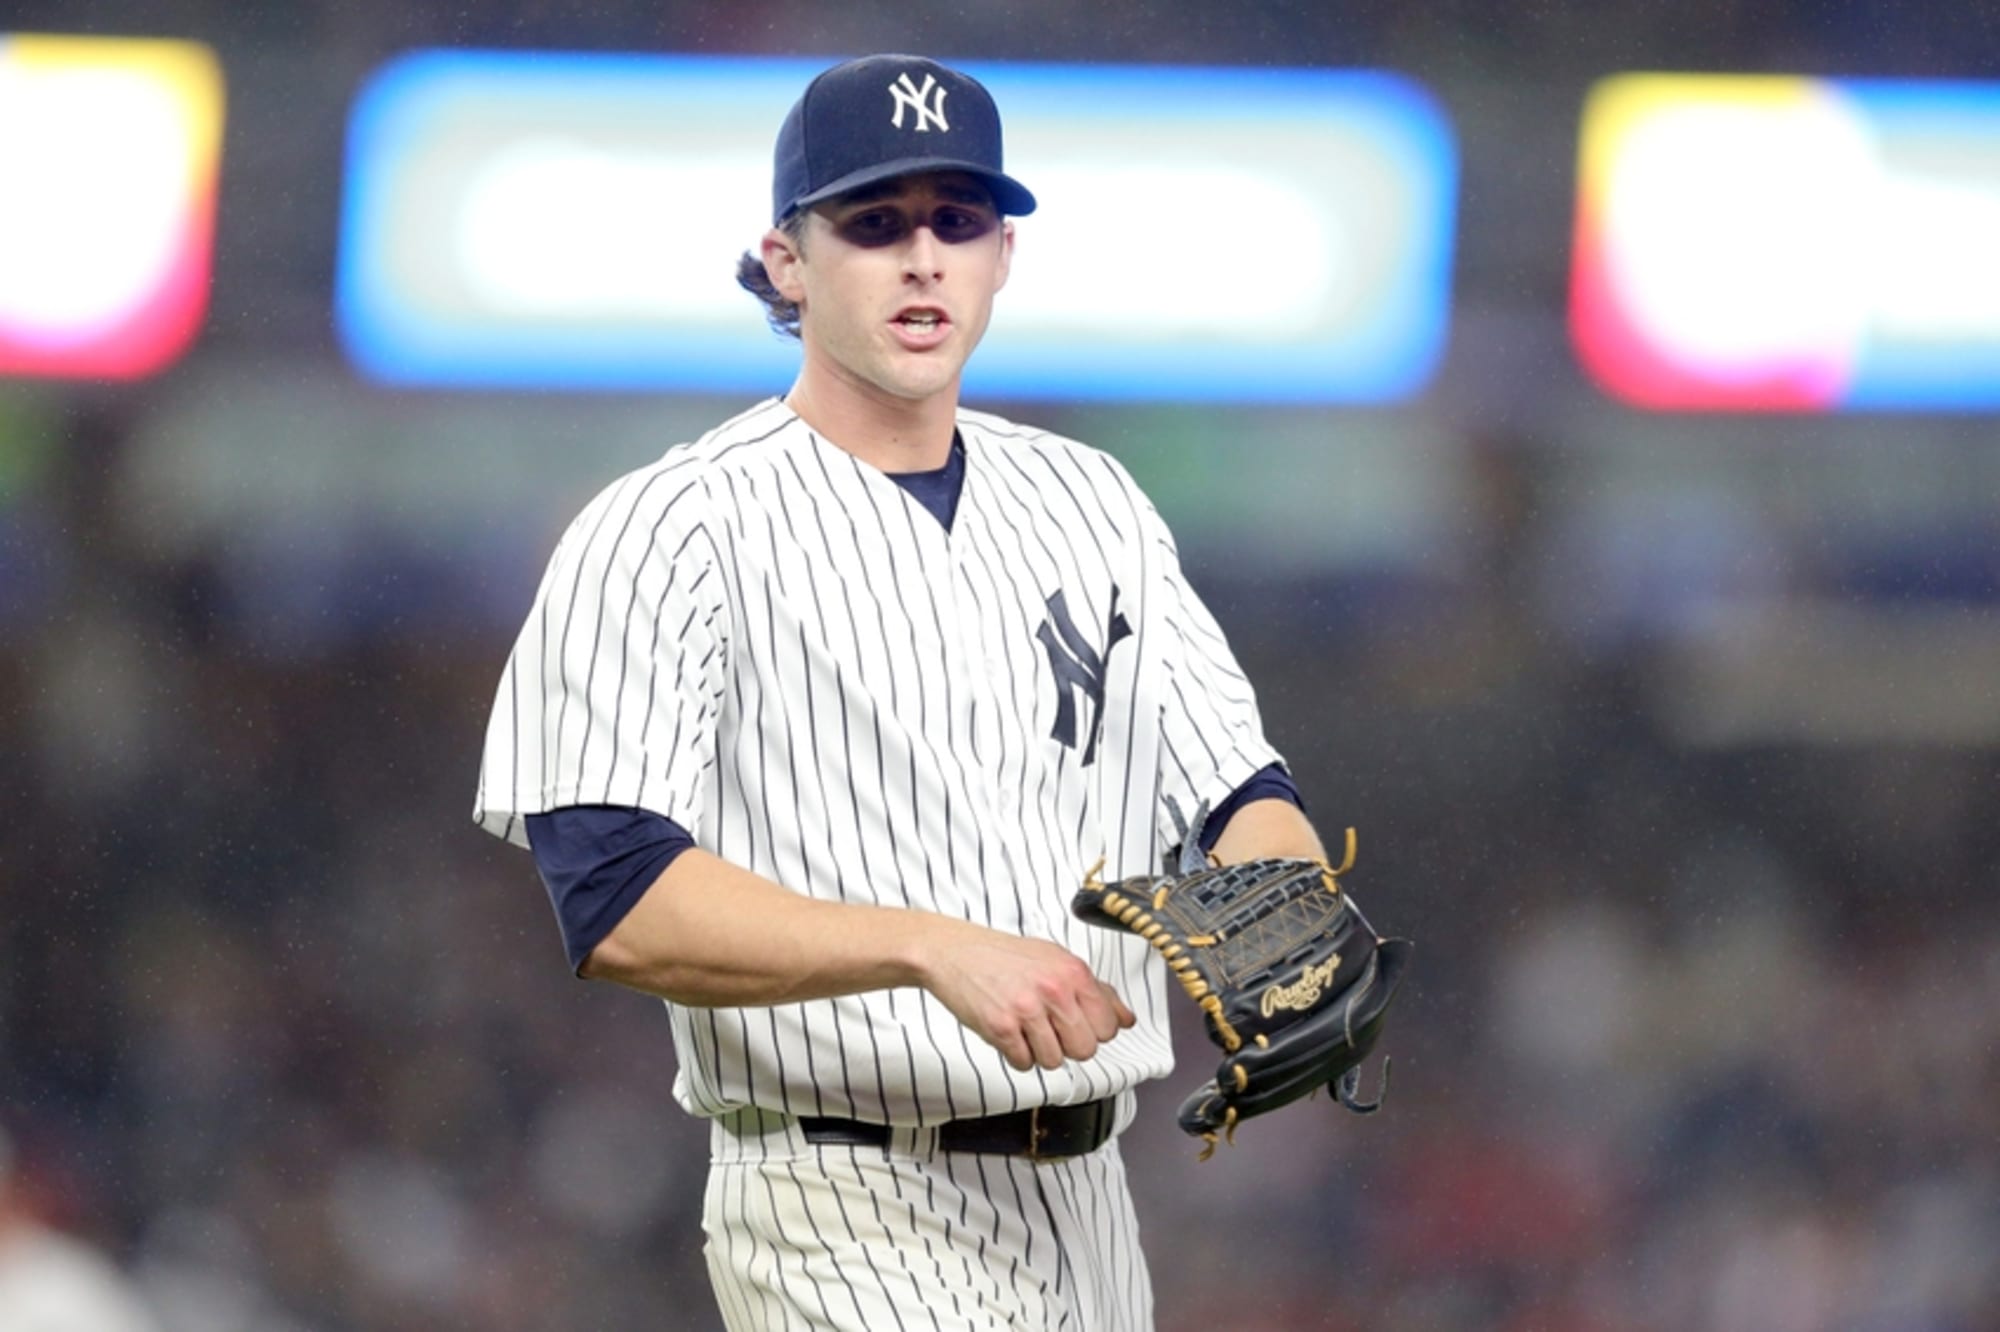 Yankees Fans Are These Pitchers Best Suited for the Rotation or the Pen?